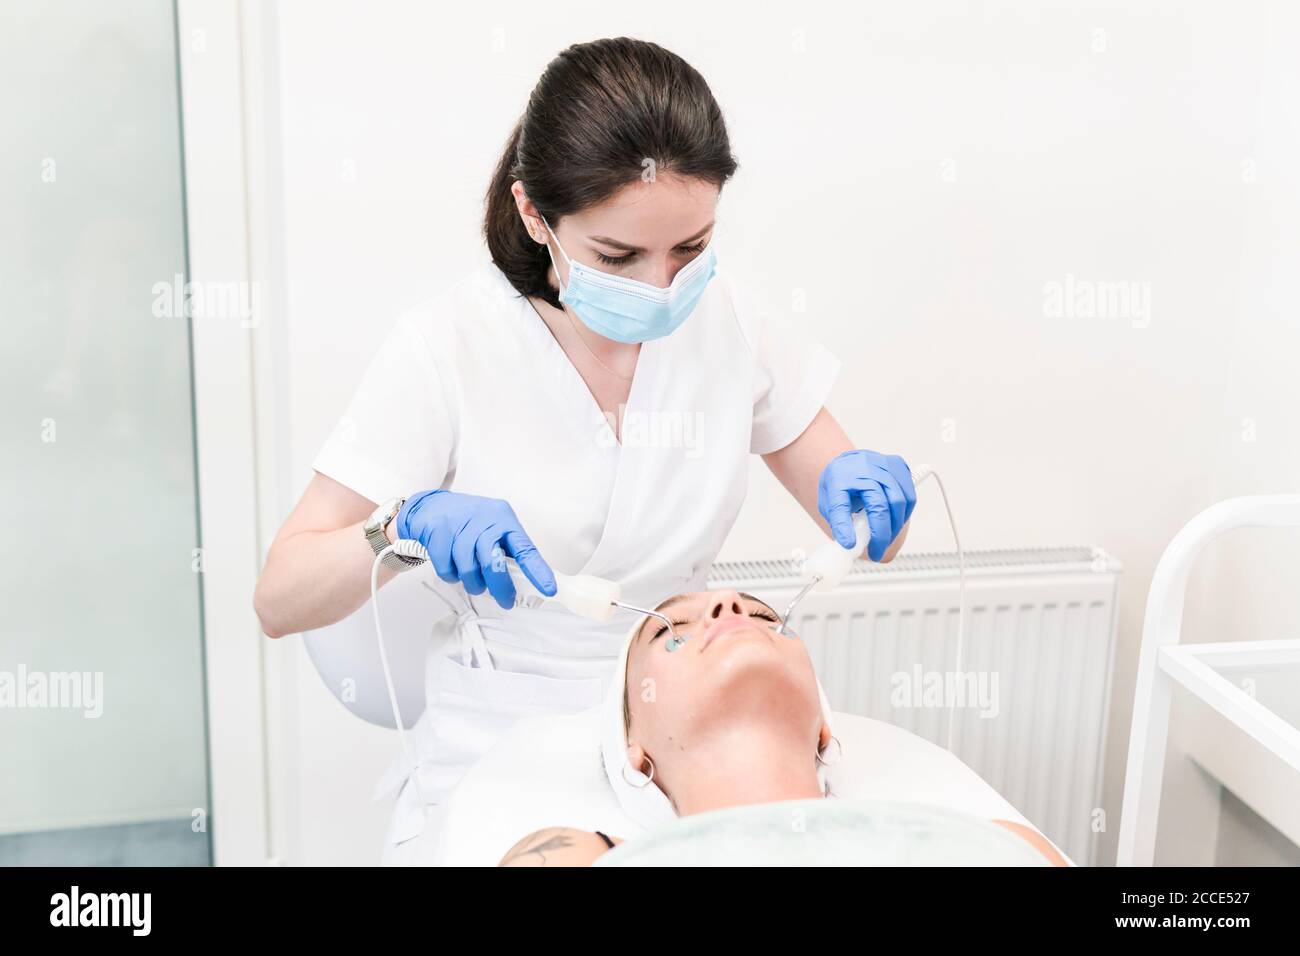 The young female client of cosmetic salon having microcurrent procedure on her face with special devices, close-up. Beautician using electrical impuls Stock Photo